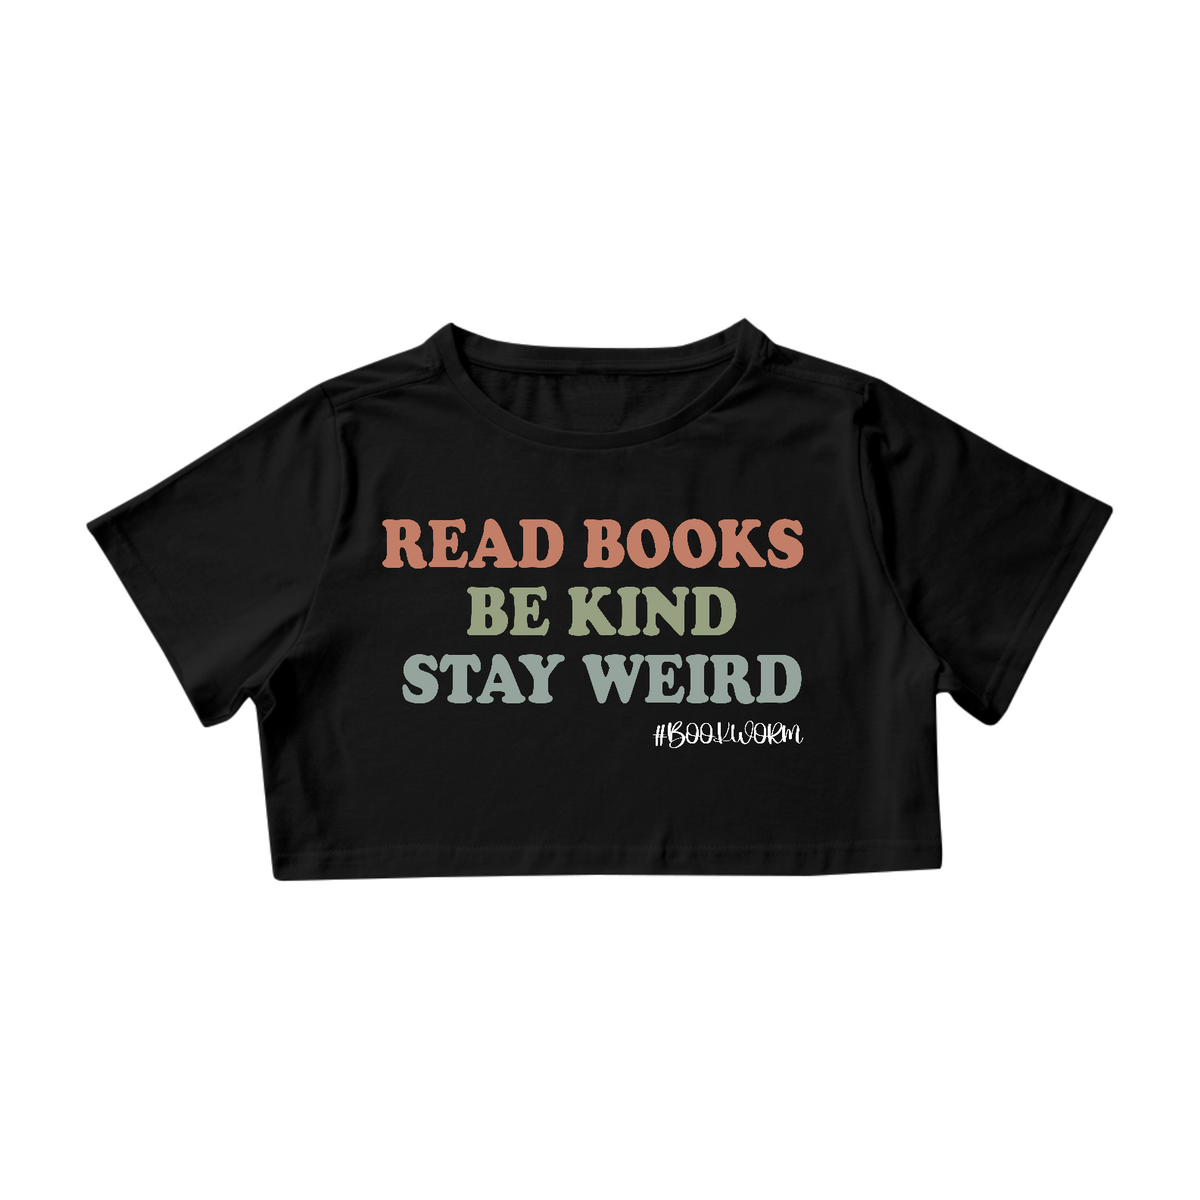 Nome do produto: Cropped Read Books Be Kind Stay Weird